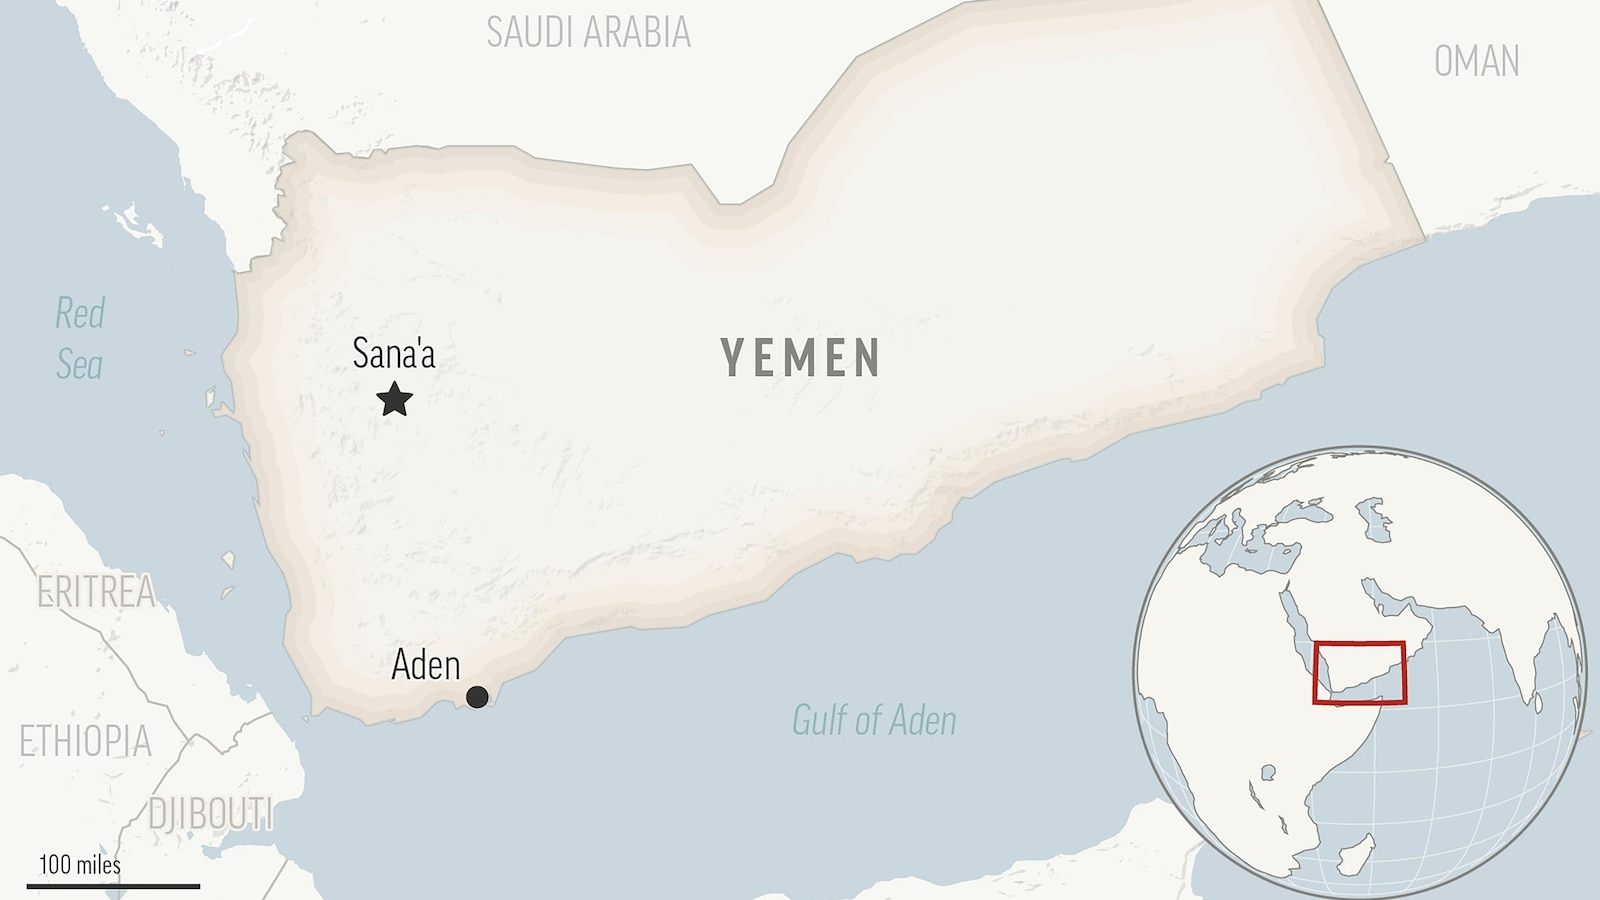 5 missiles land near ship in Red Sea, likely the latest attack by Yemen's Houthis